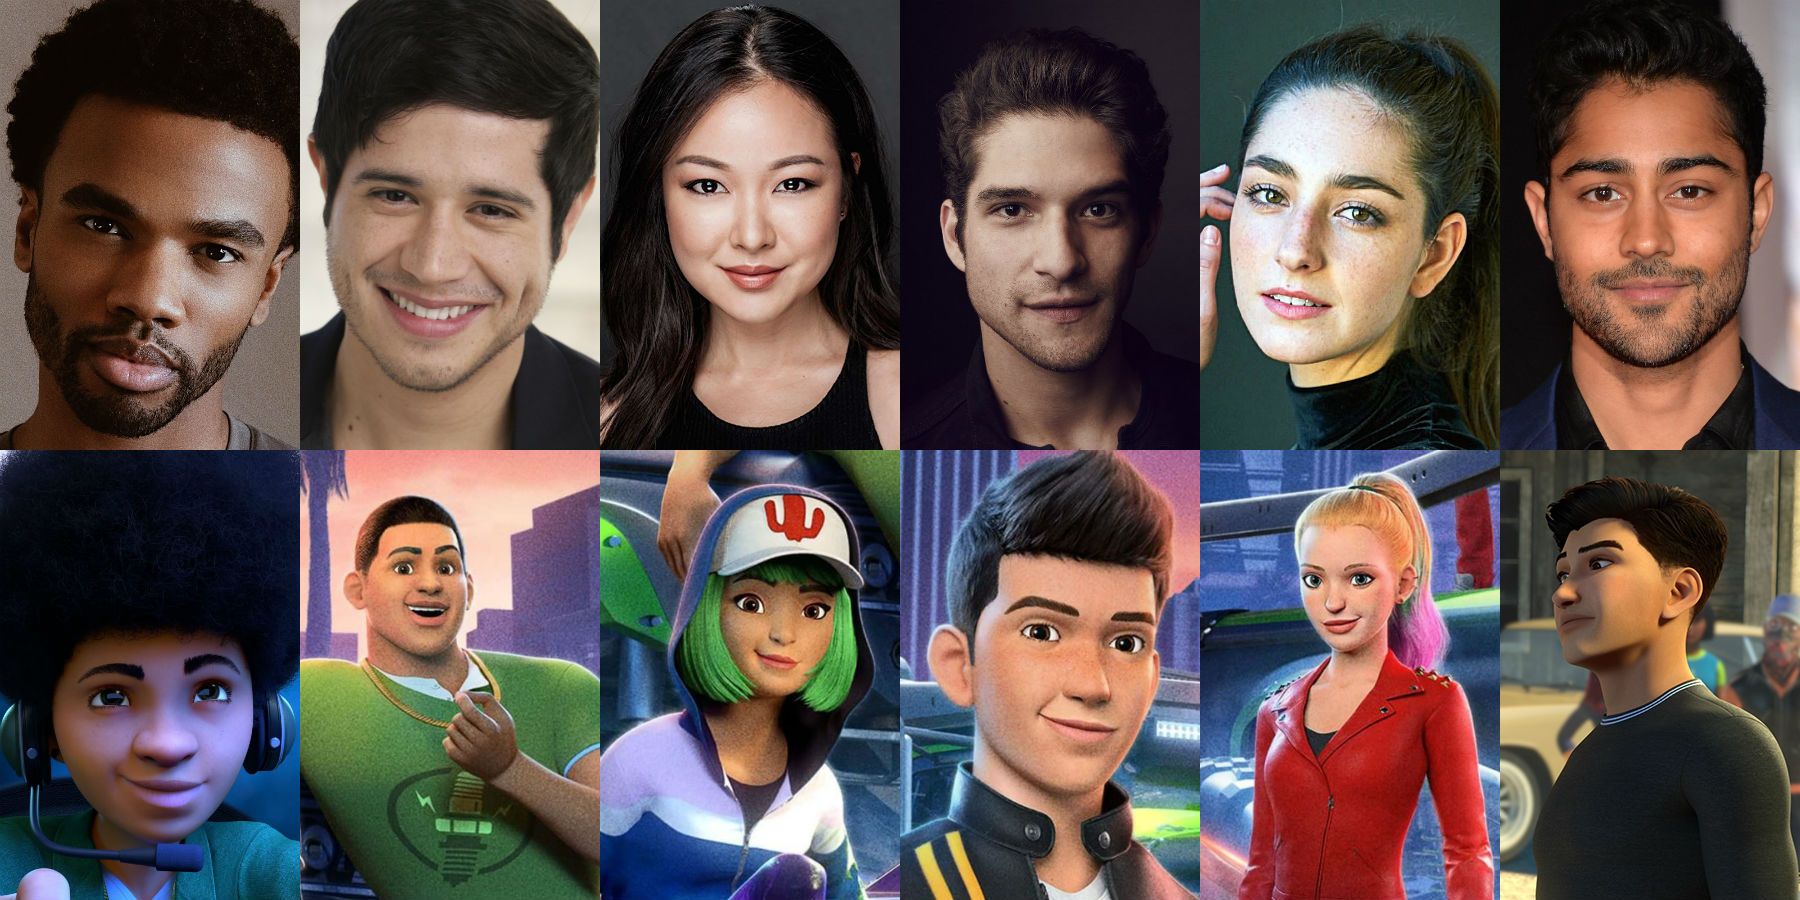 Fast & Furious Spy Racers: Voice Cast & Character Guide